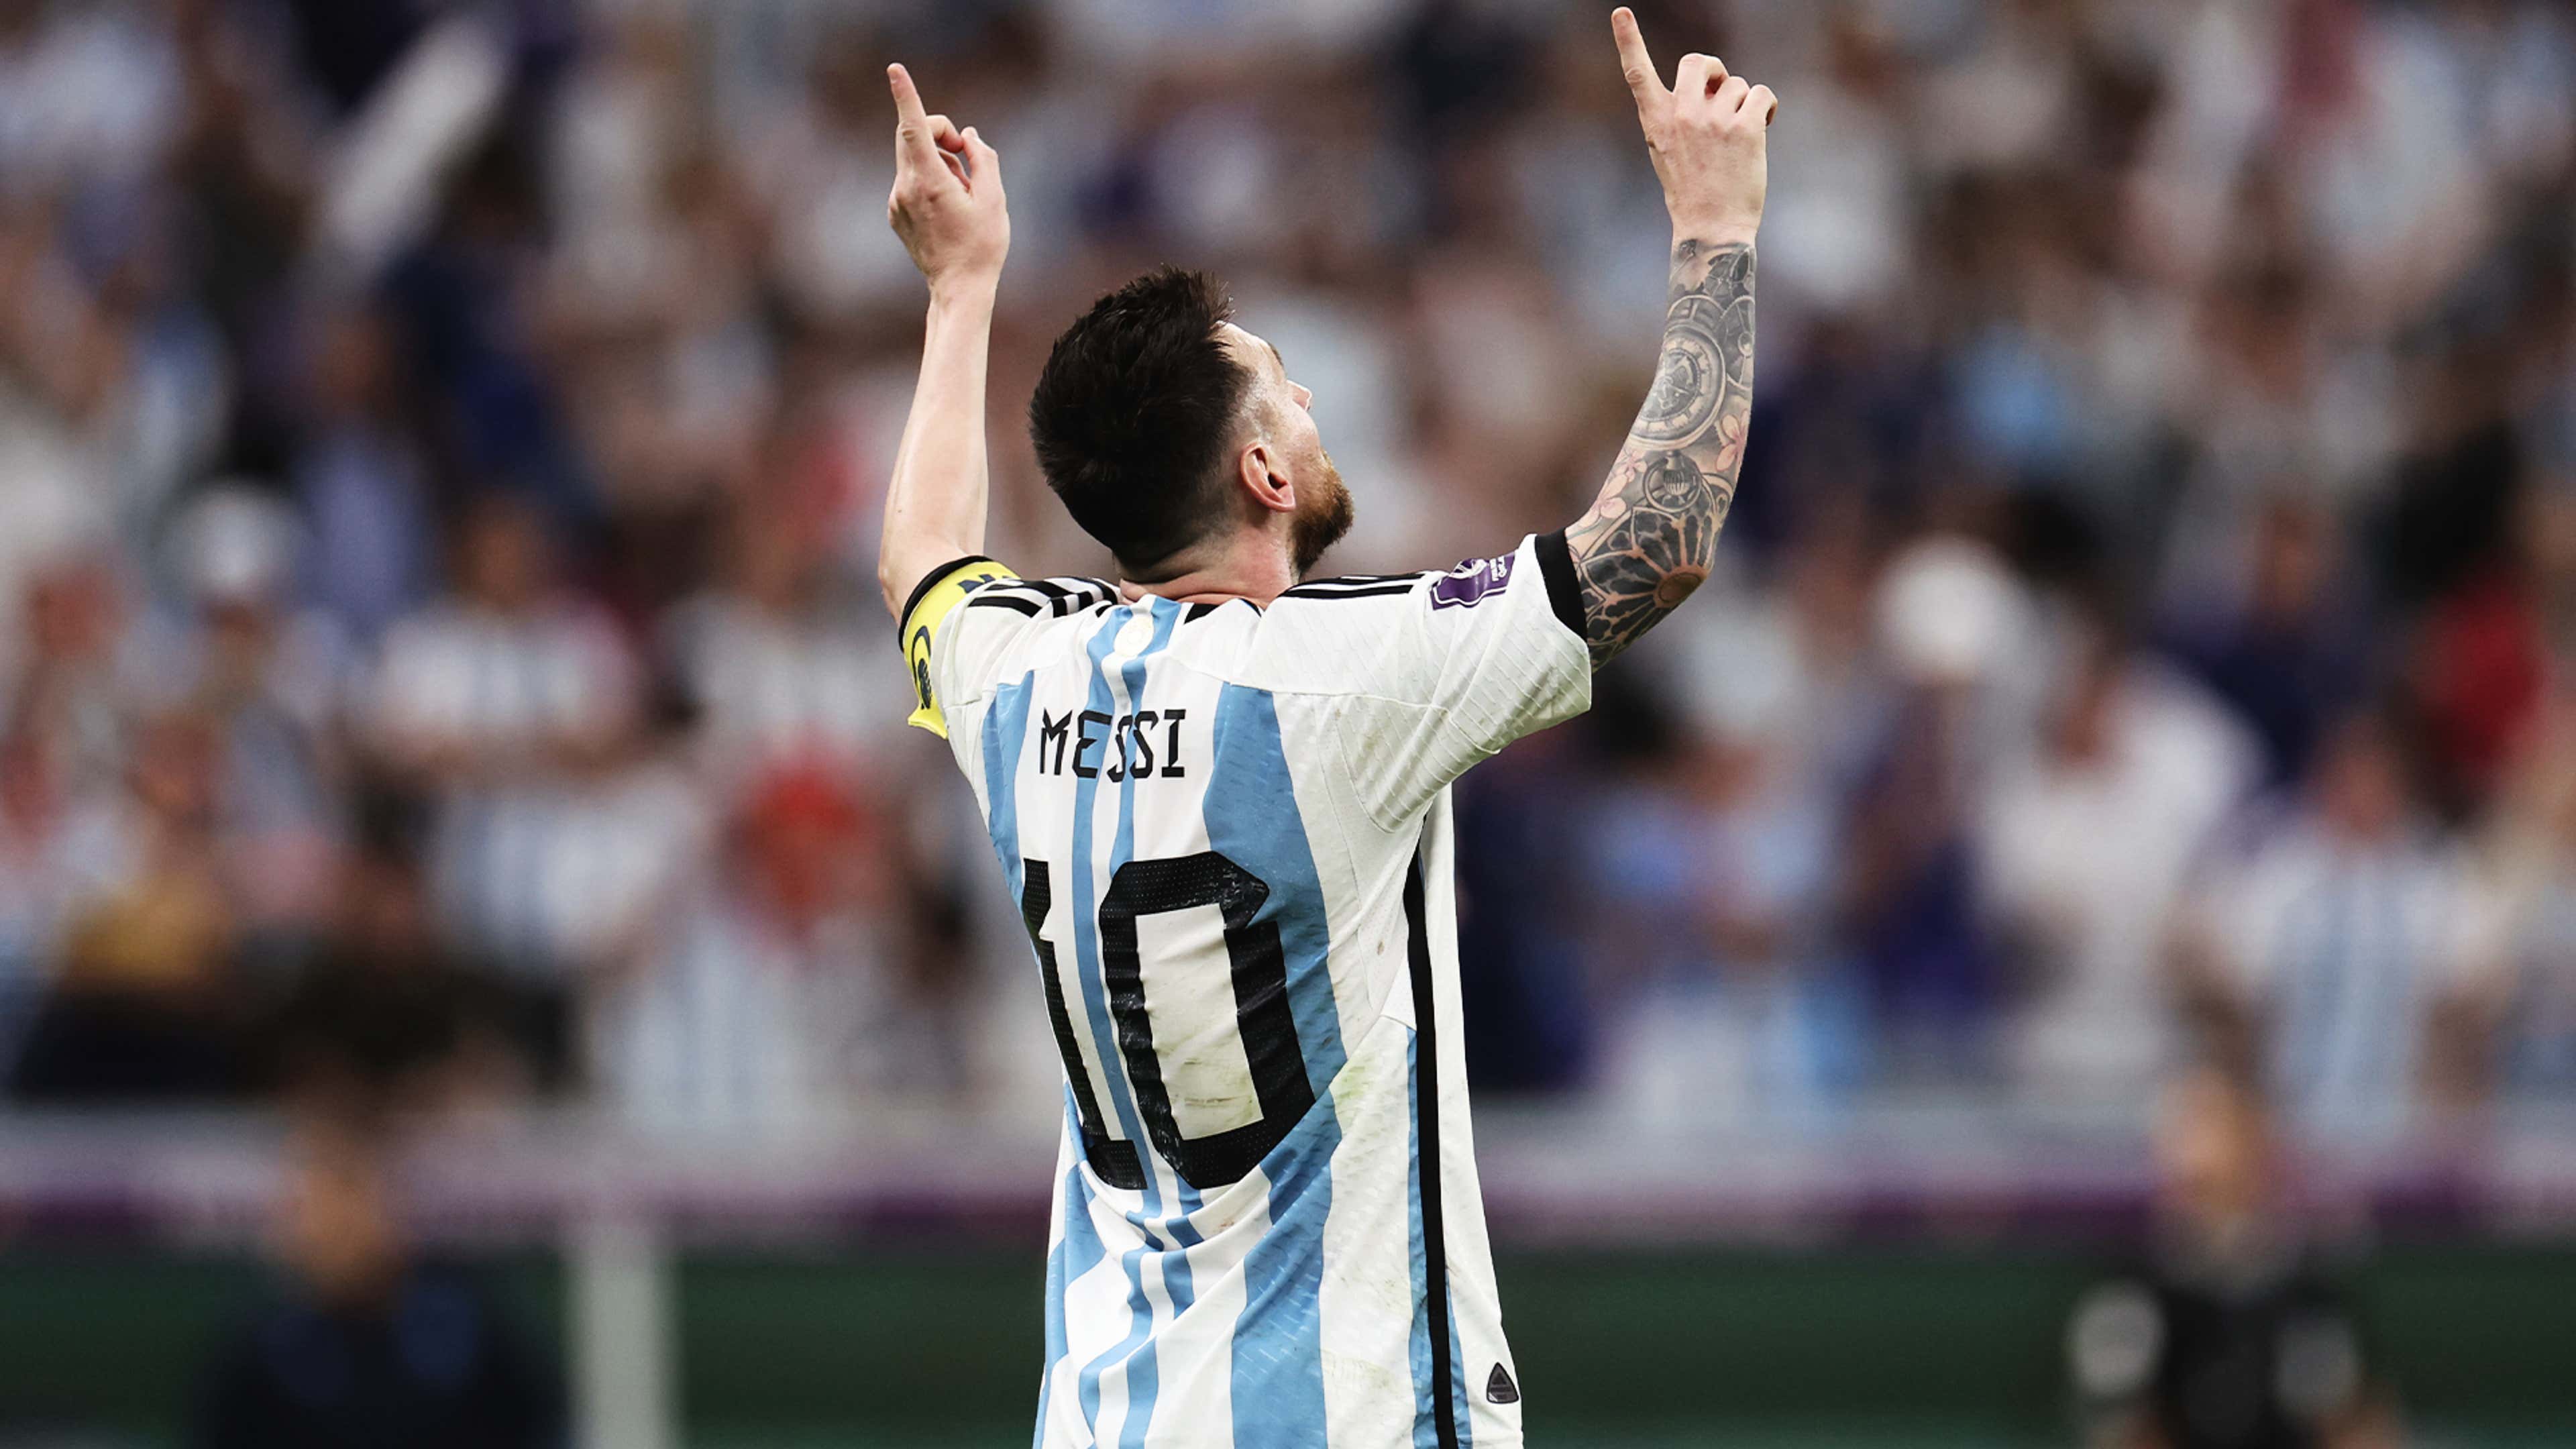 official argentina messi jersey